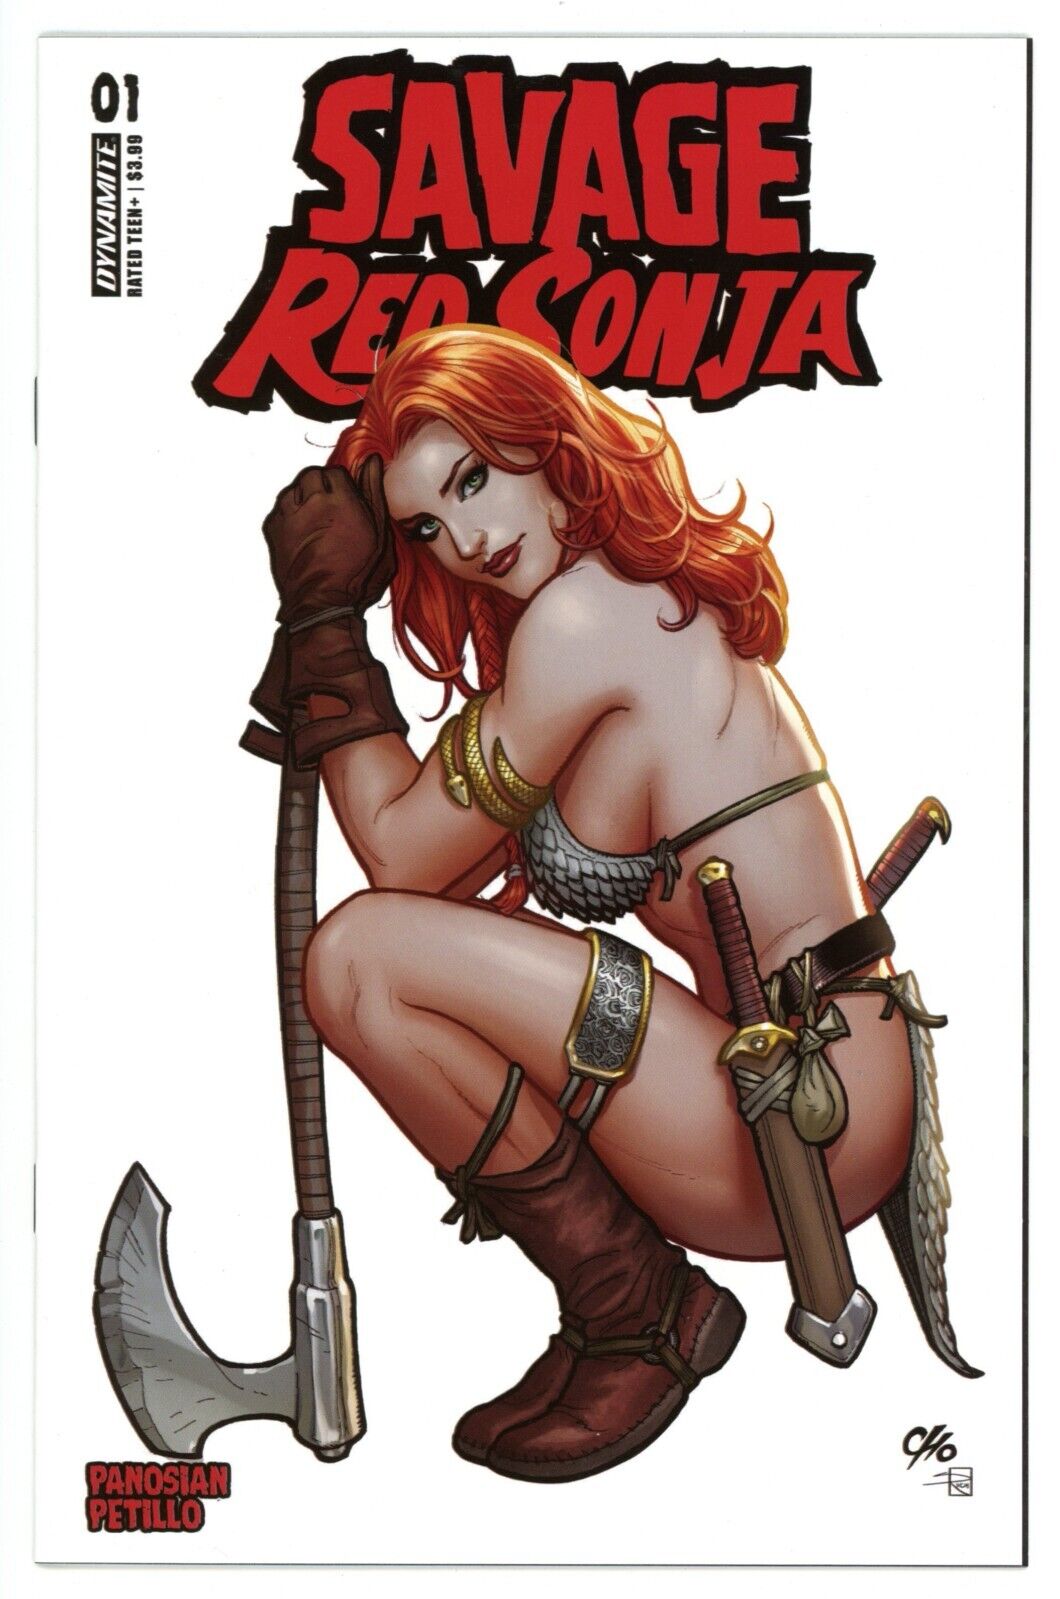 Savage Red Sonja #1    |   Cover B  |  Frank  Cho variant  |   NM  NEW